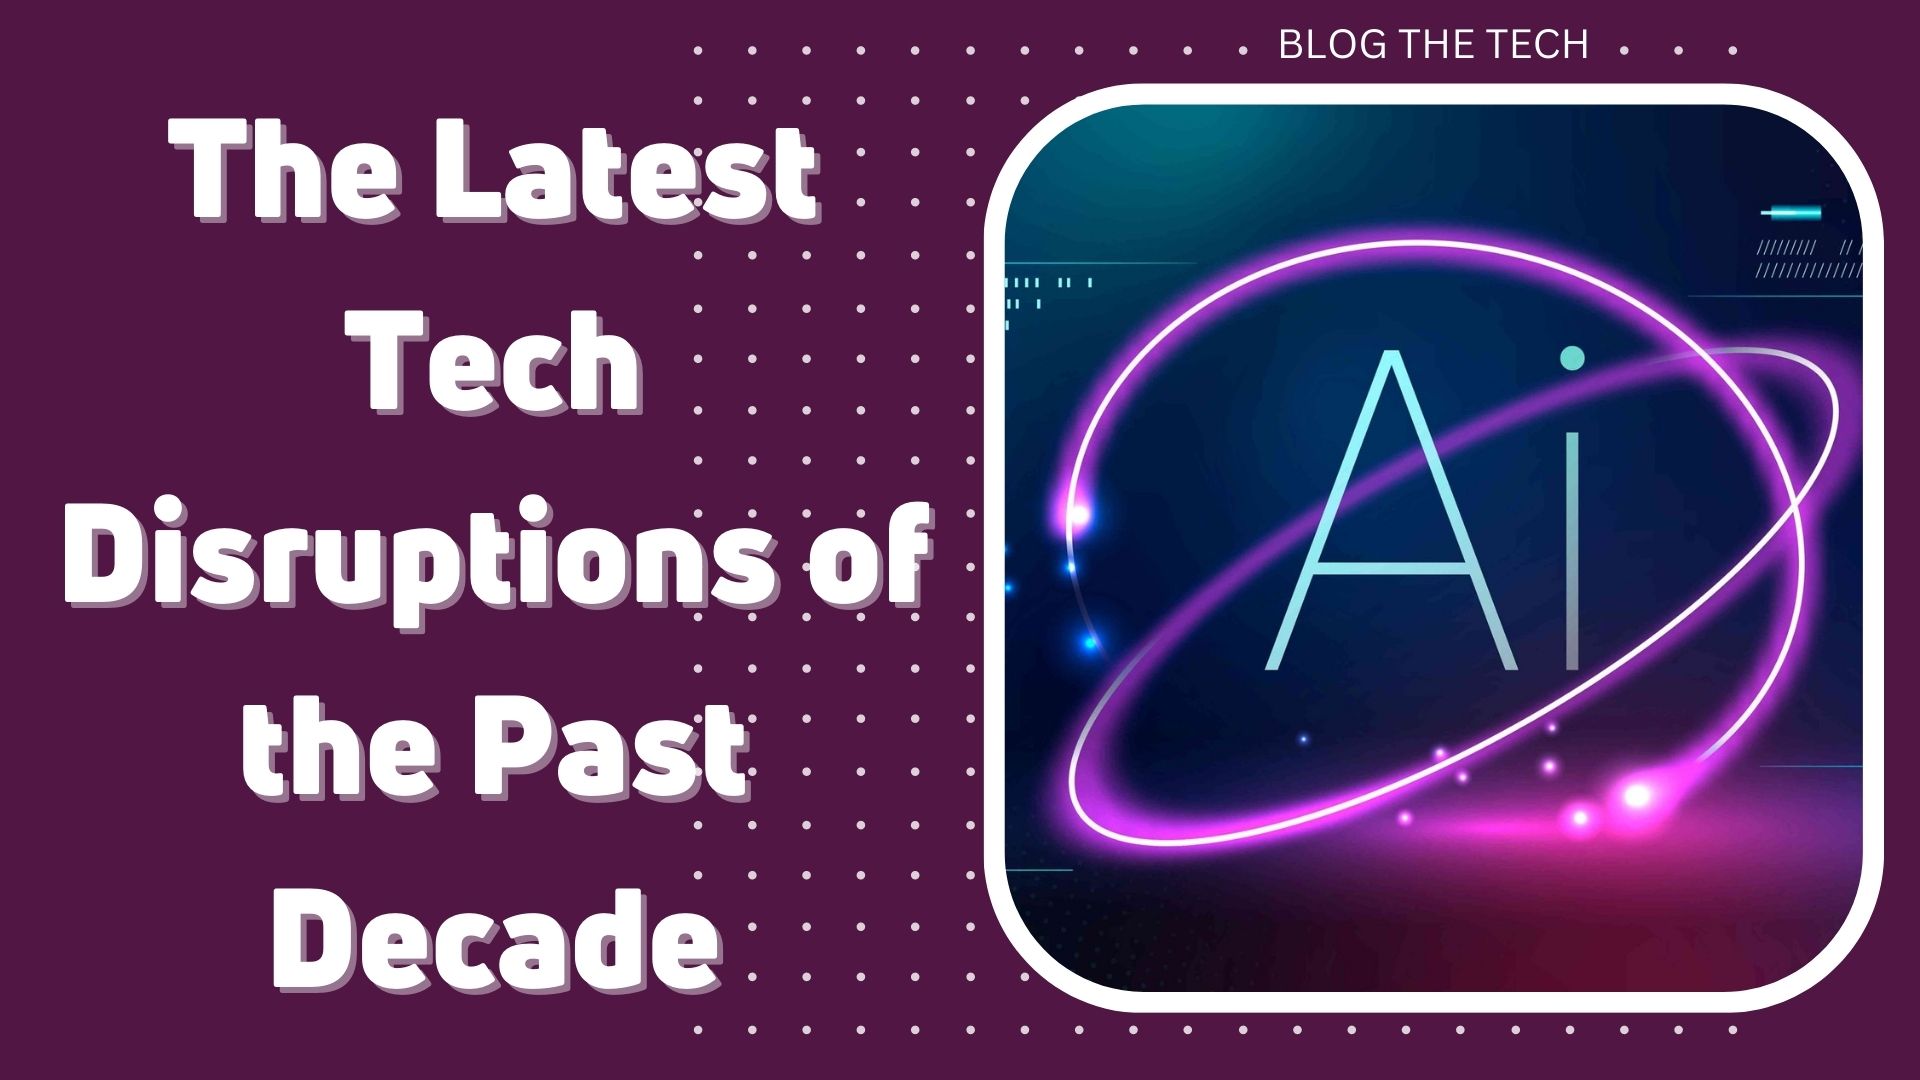 The Latest Tech Disruptions of the Past Decade